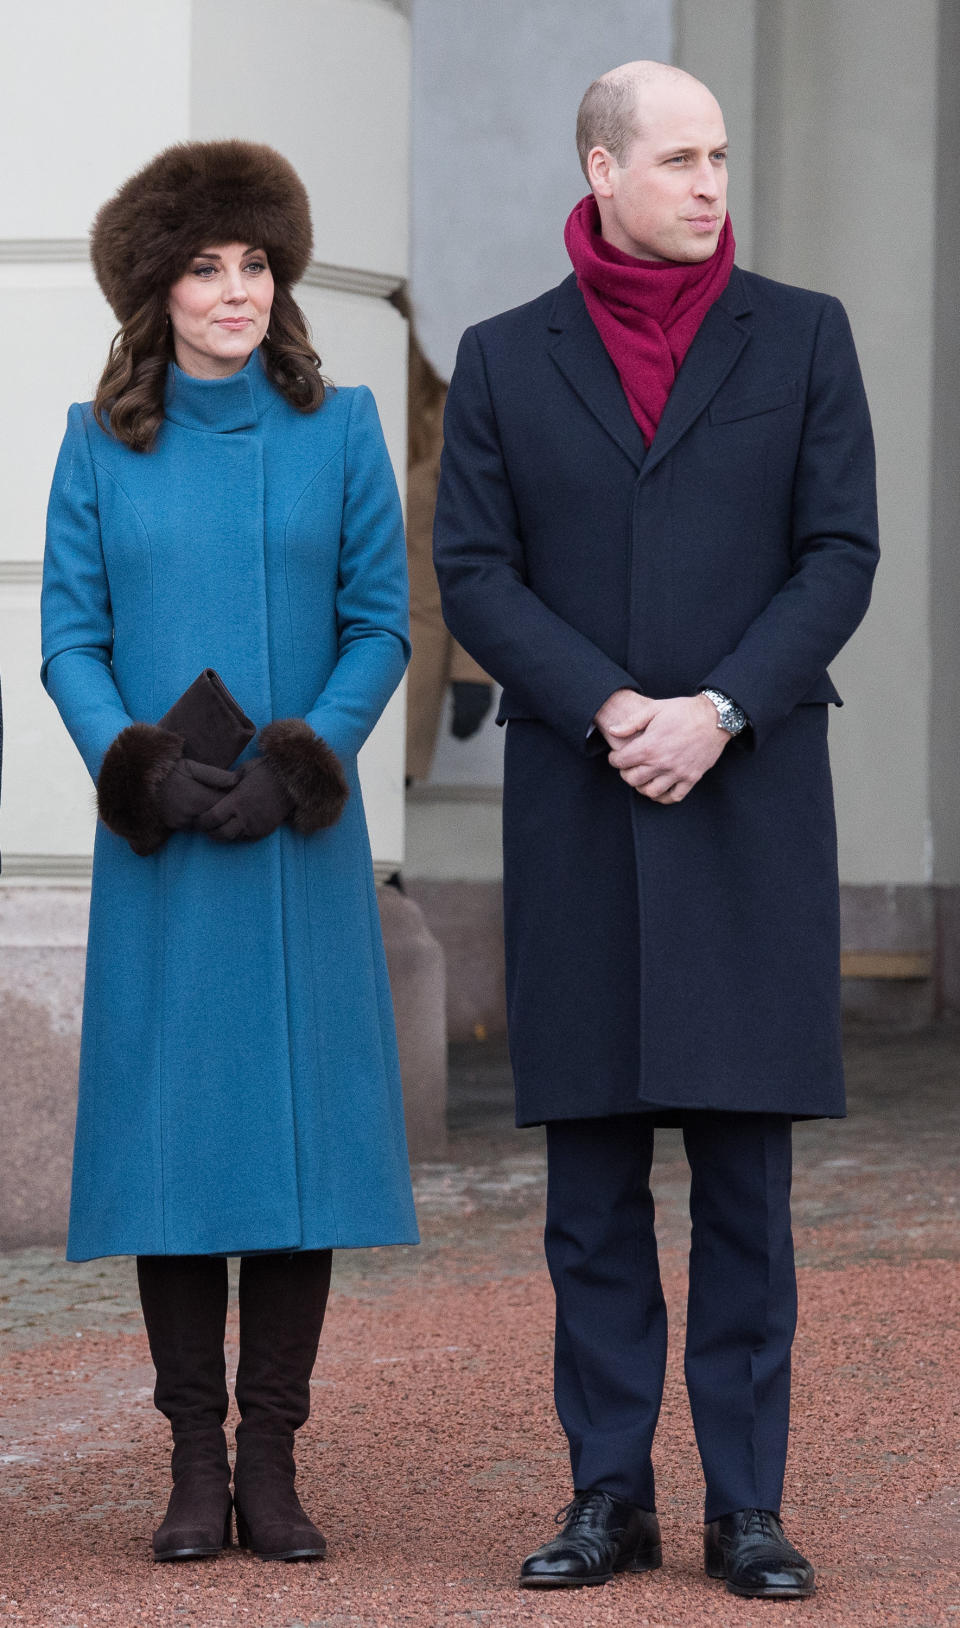 The royals&nbsp;visit the Princess Ingrid Alexandra Sculpture Park in Oslo, Norway, on Feb. 1.